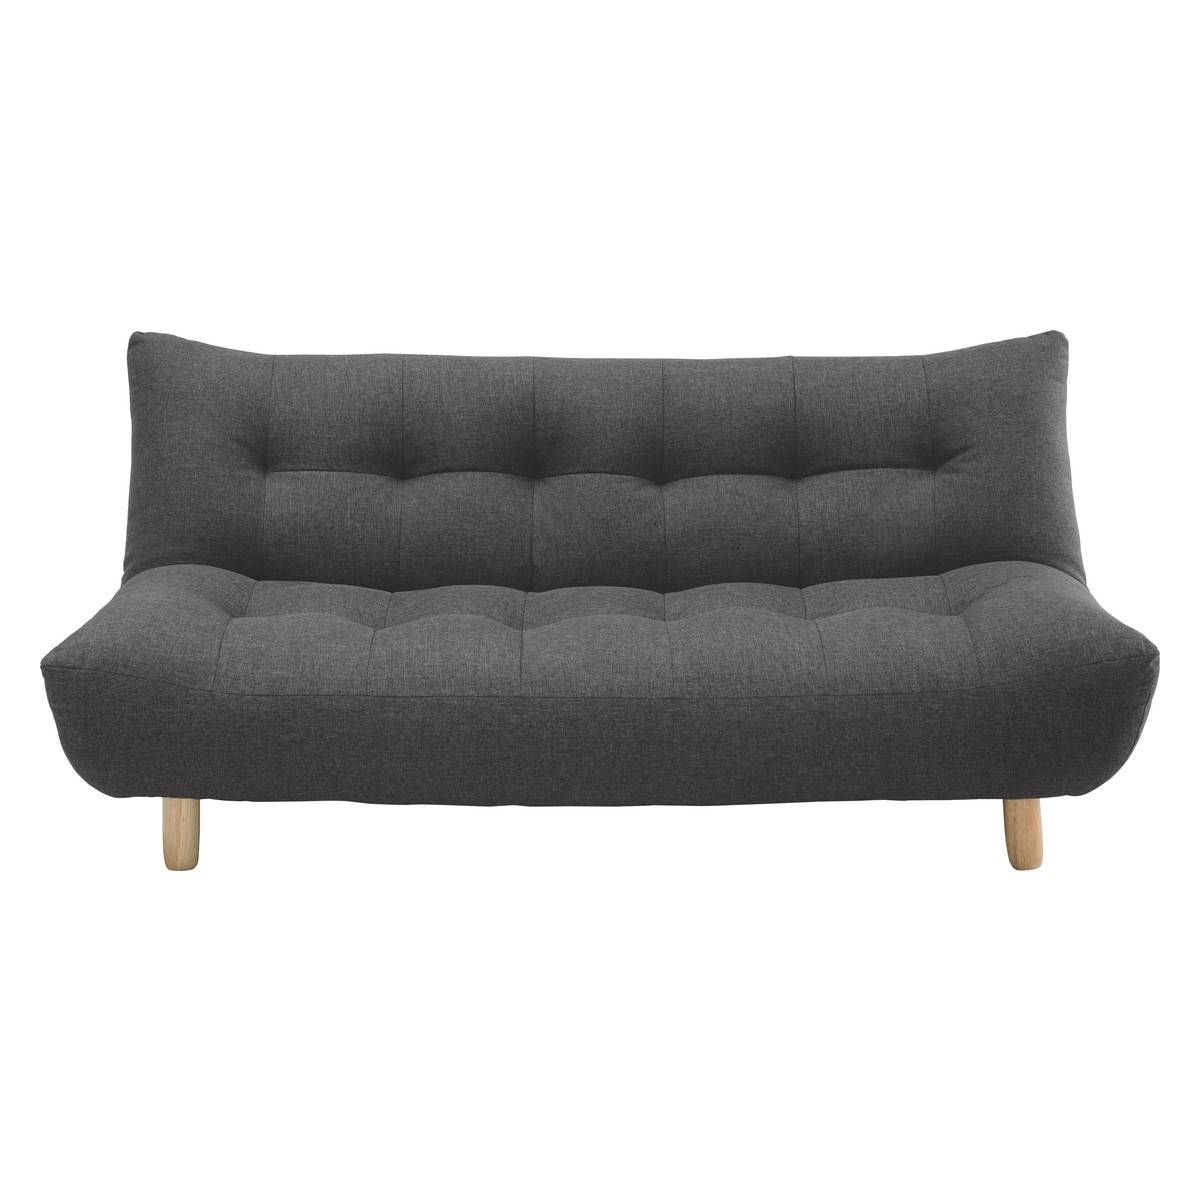 Kota Charcoal Fabric 2 Seater Sofa Bed | Buy Now At Habitat Uk Pertaining To Sofa Beds Chairs (View 13 of 15)